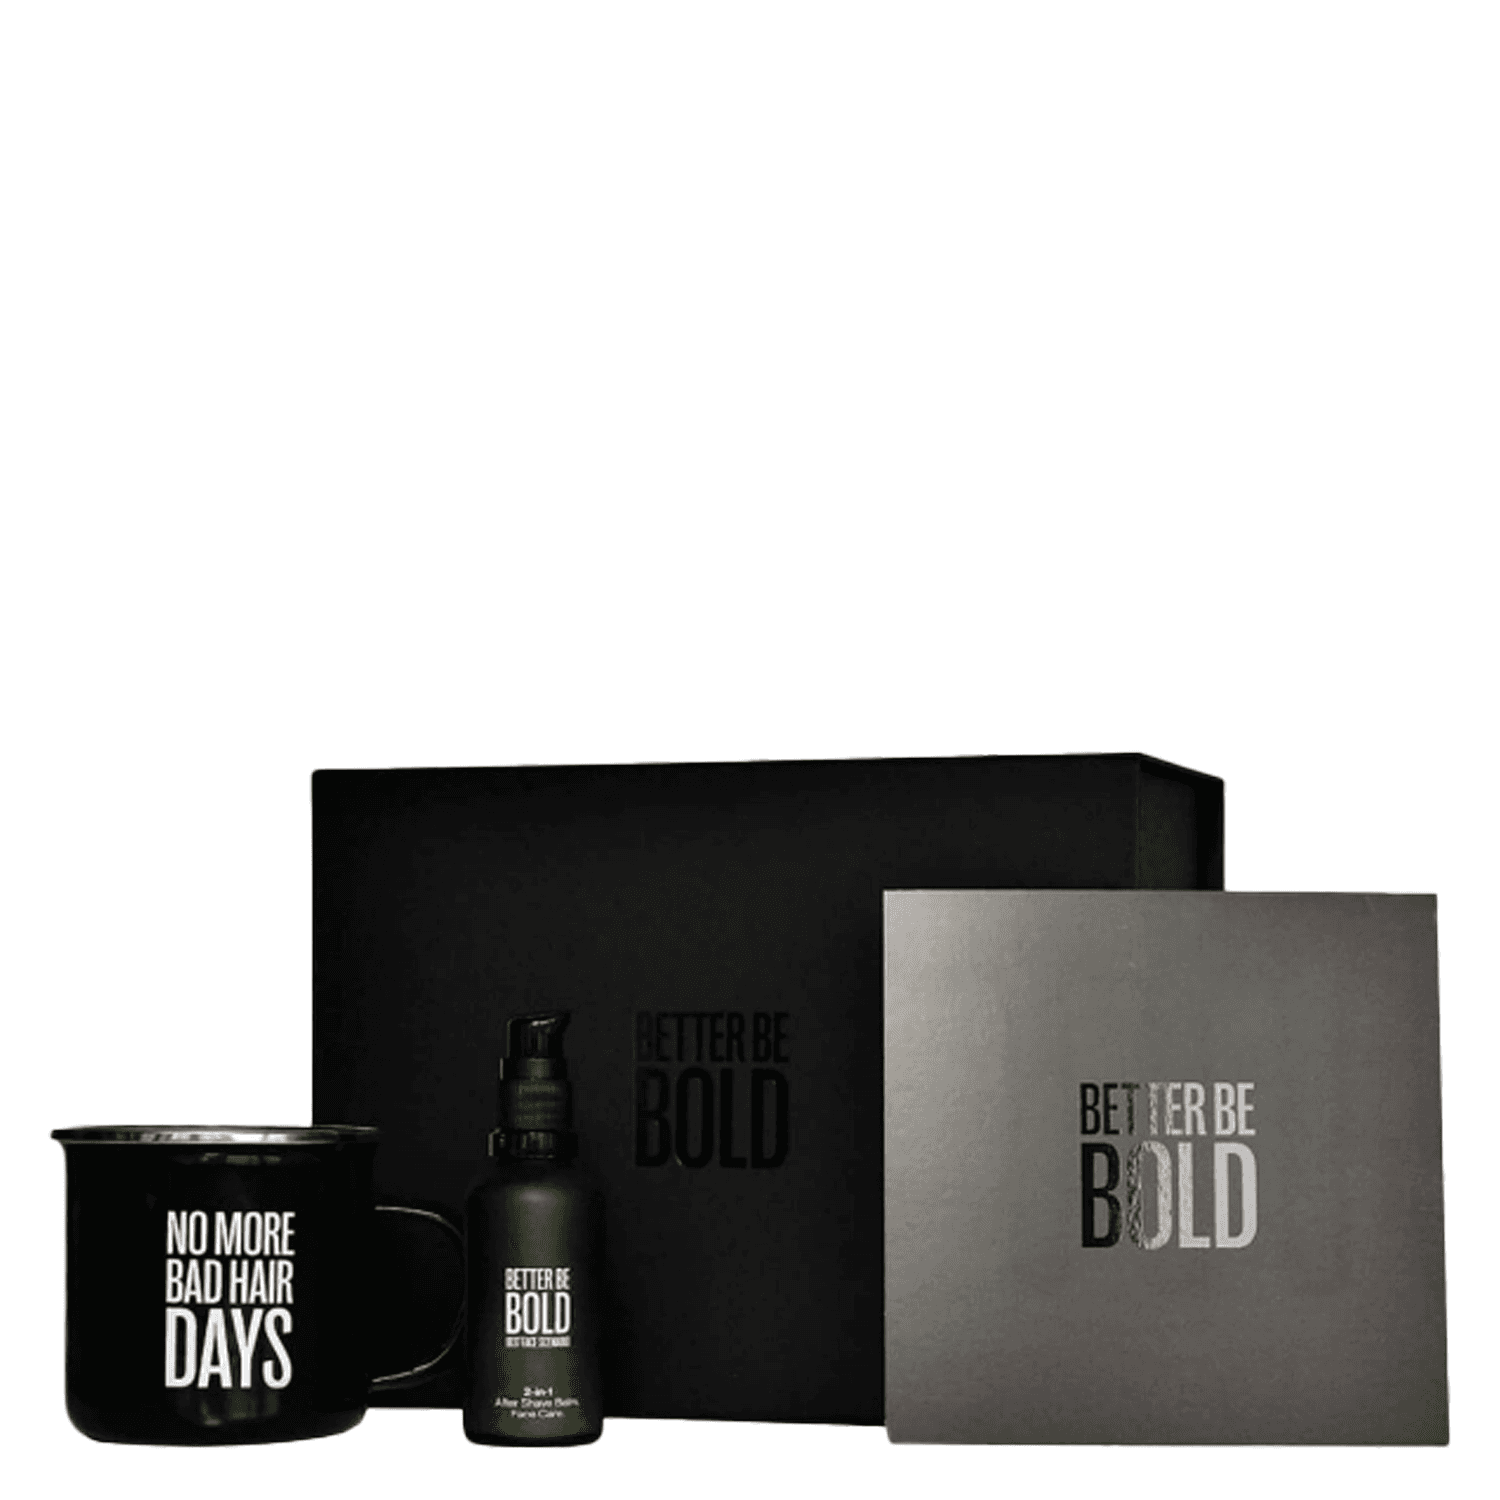 BETTER BE BOLD - Gift box for strong bald heads